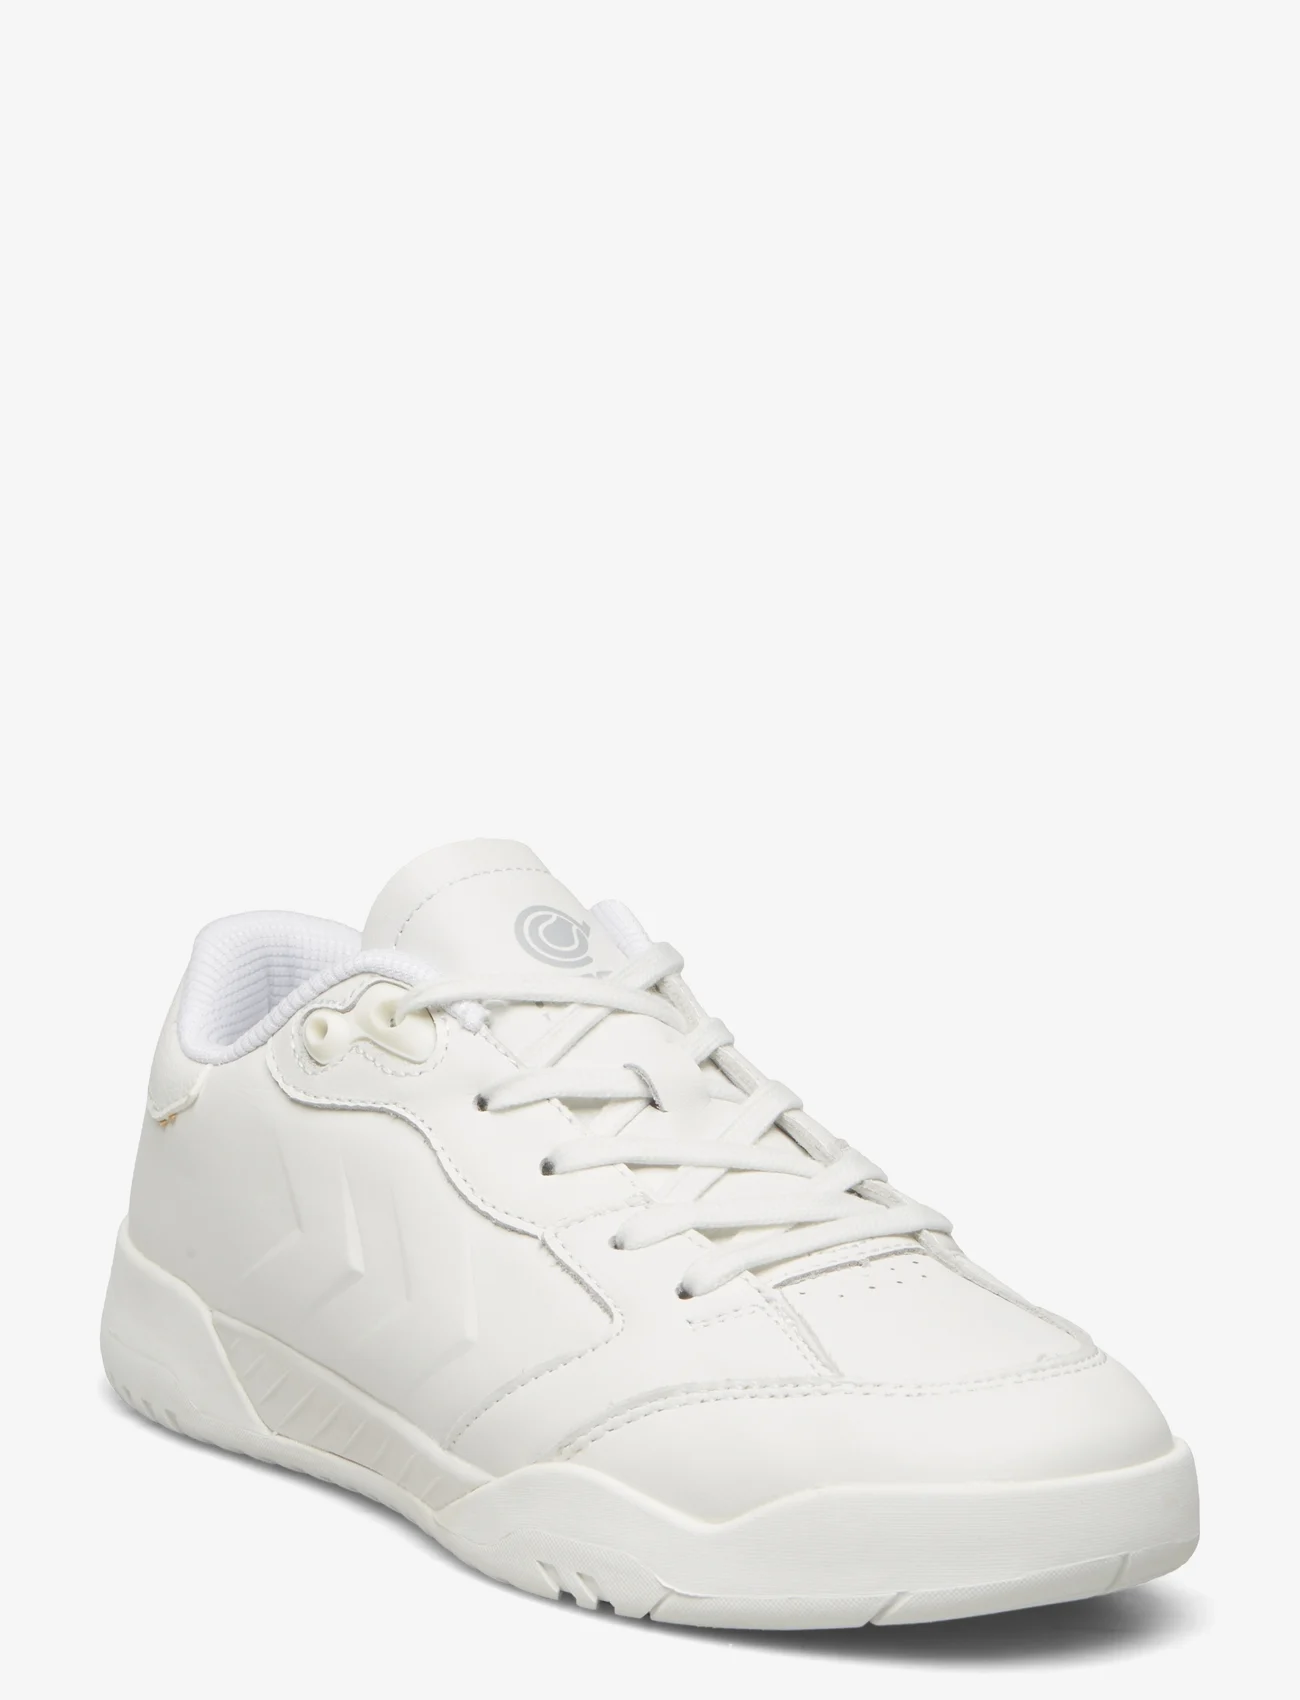 Hummel - TOP SPIN REACH LX-E - low top sneakers - white - 0